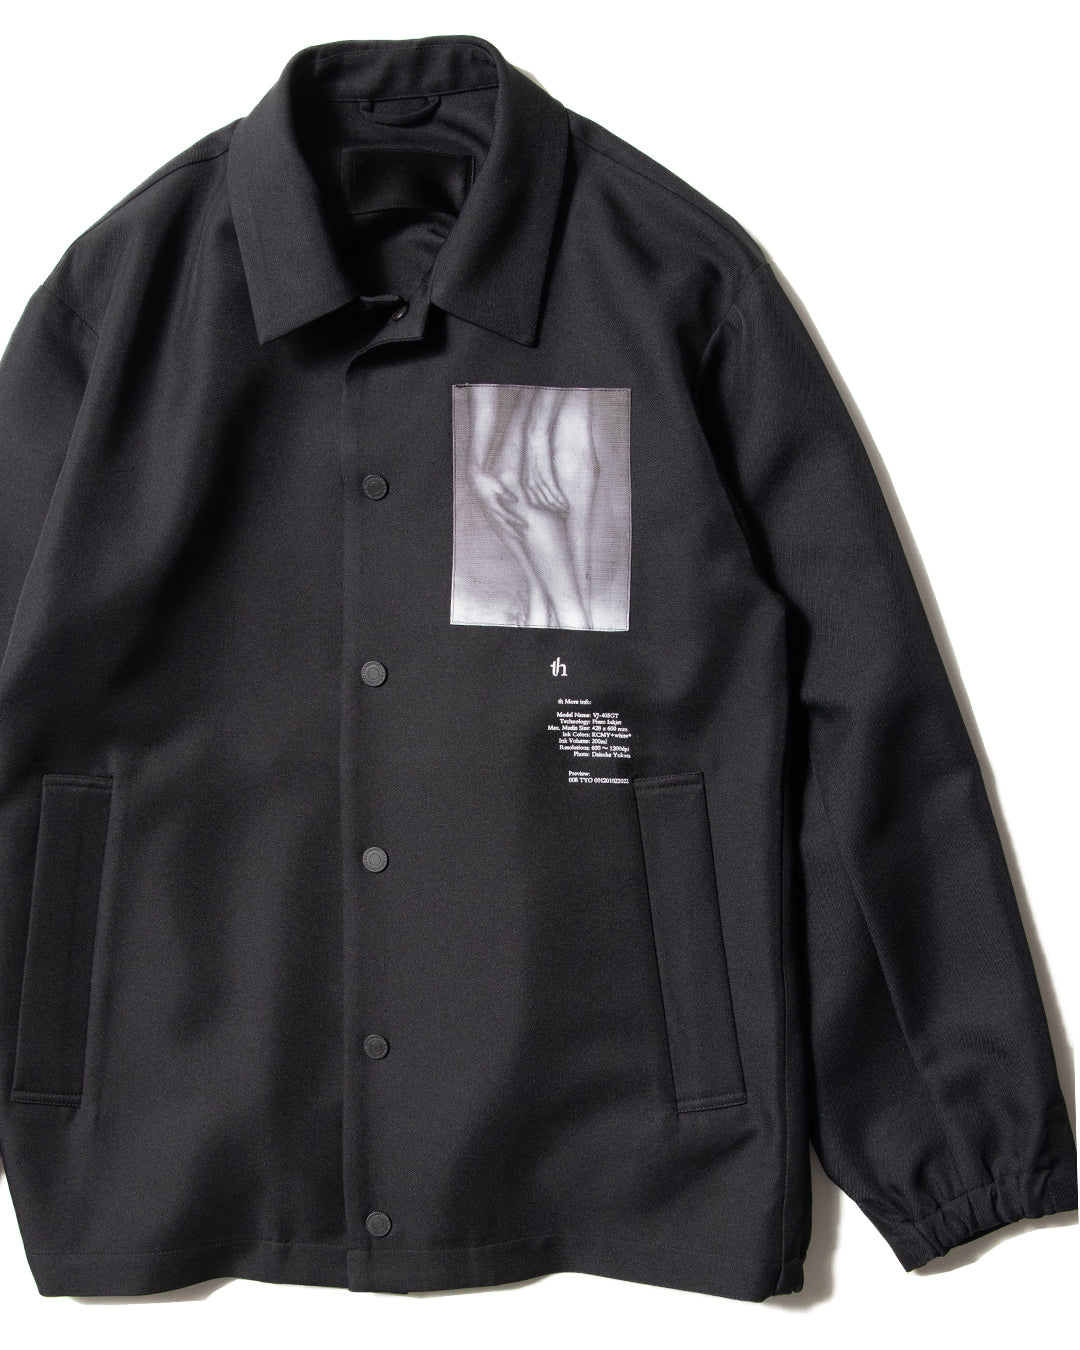 COACH JACKET (BLK) - Baby's all right